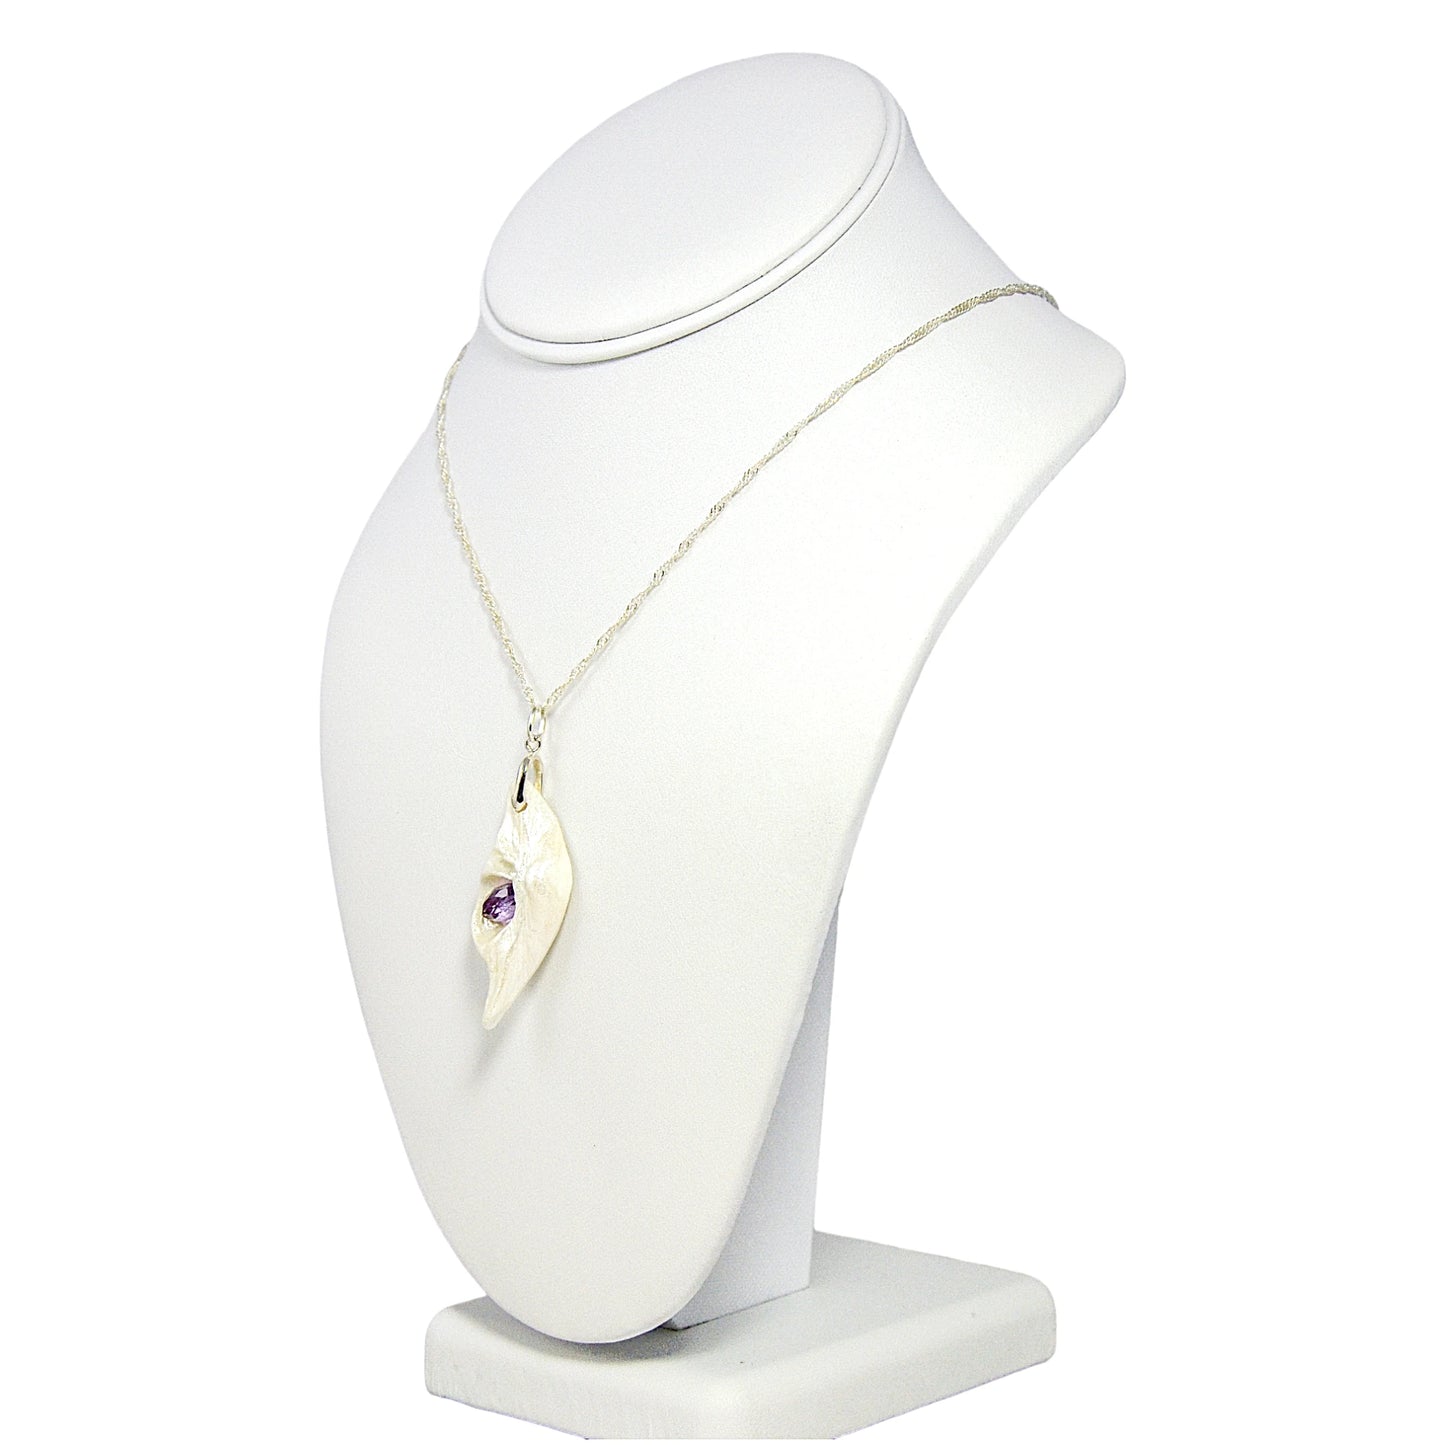 Intuition a natural seashell pendant with a beautiful rose cut marquise Amethyst.  The pendant is shown turned so the viewer can see the left side of the pendant.